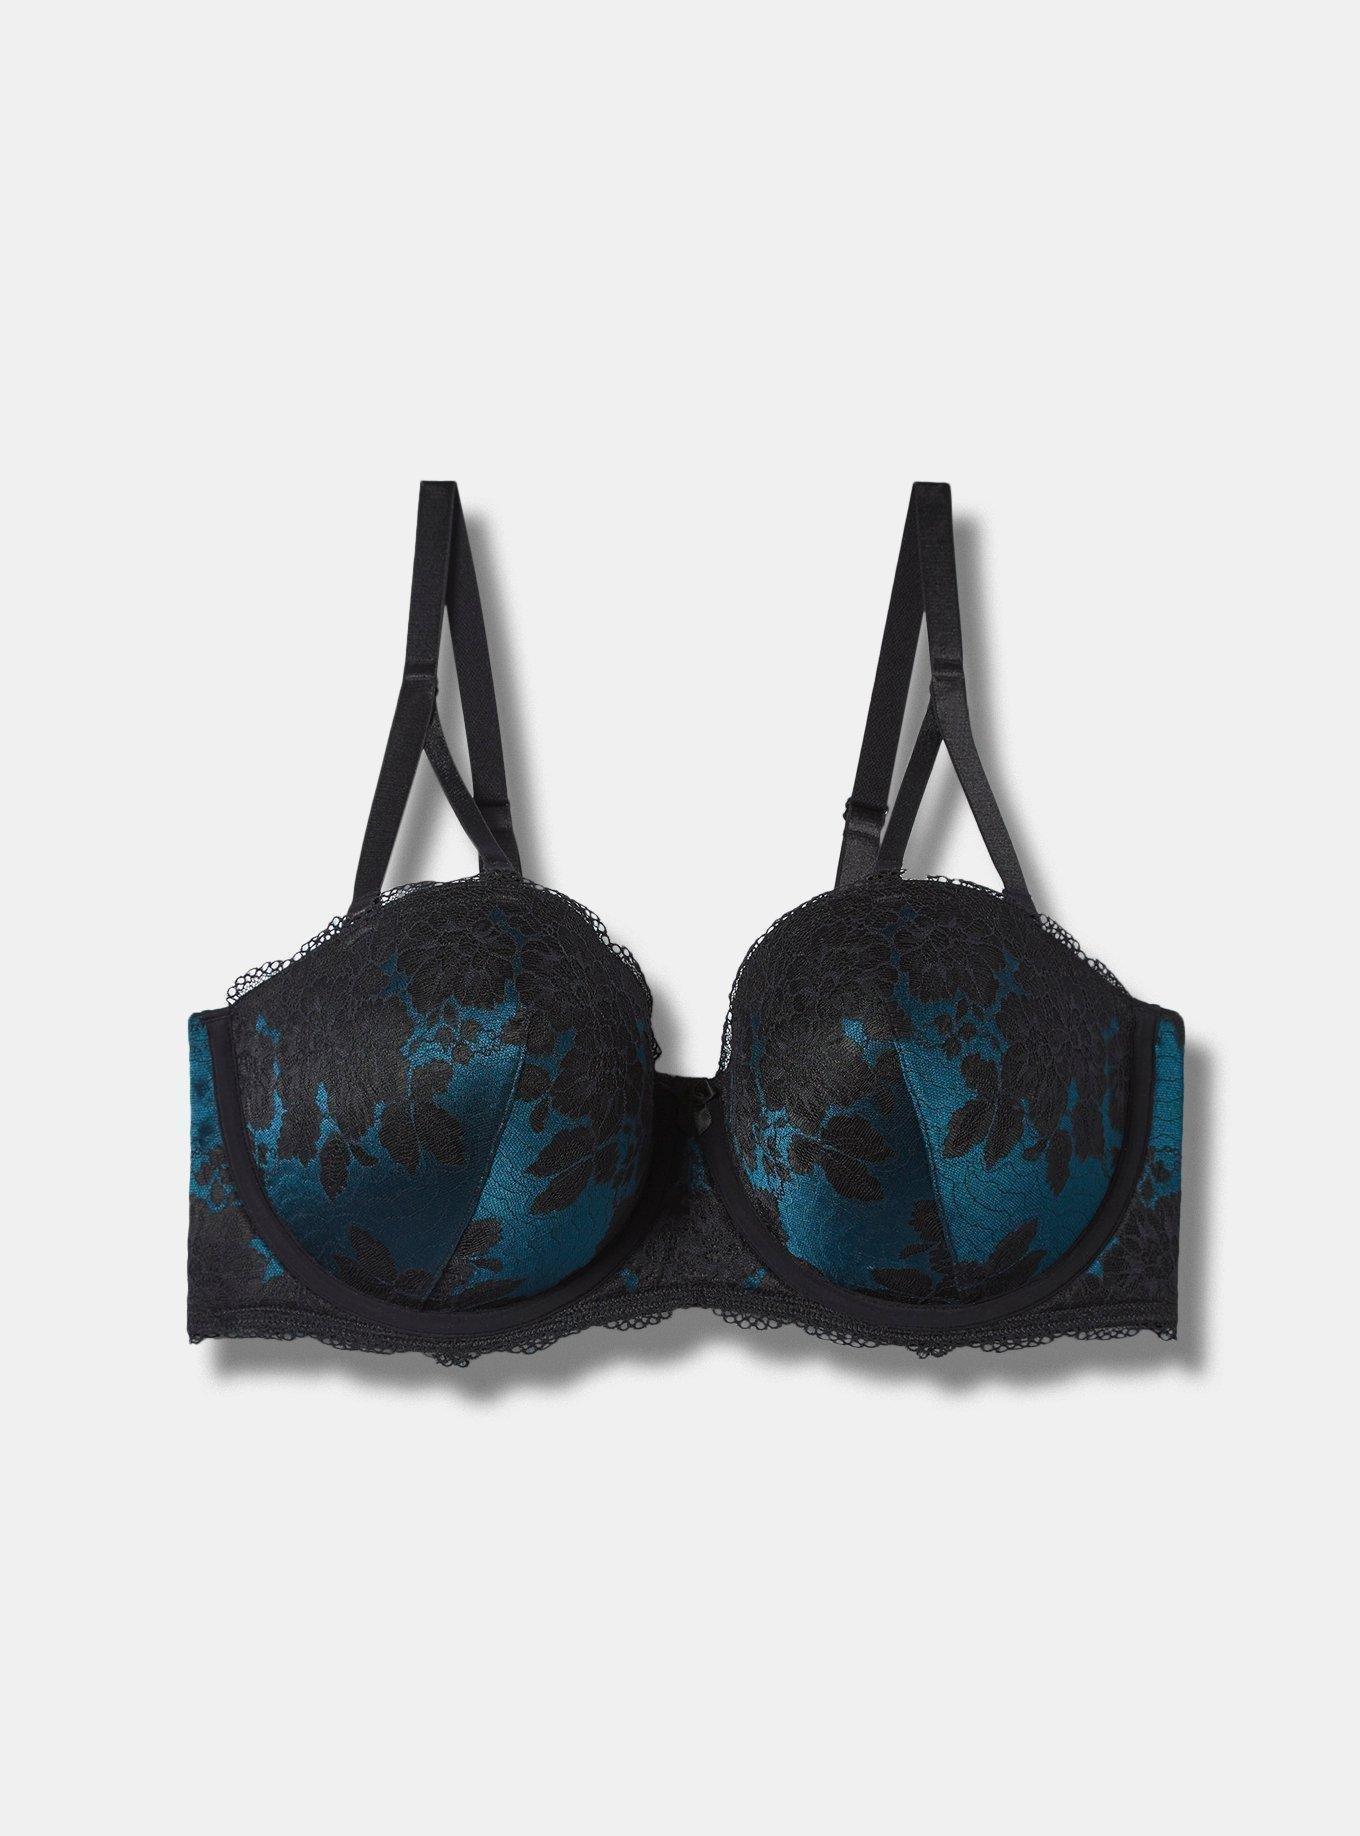 Enhance Your Style with the Victoria's Secret Strapless Bombshell Bra